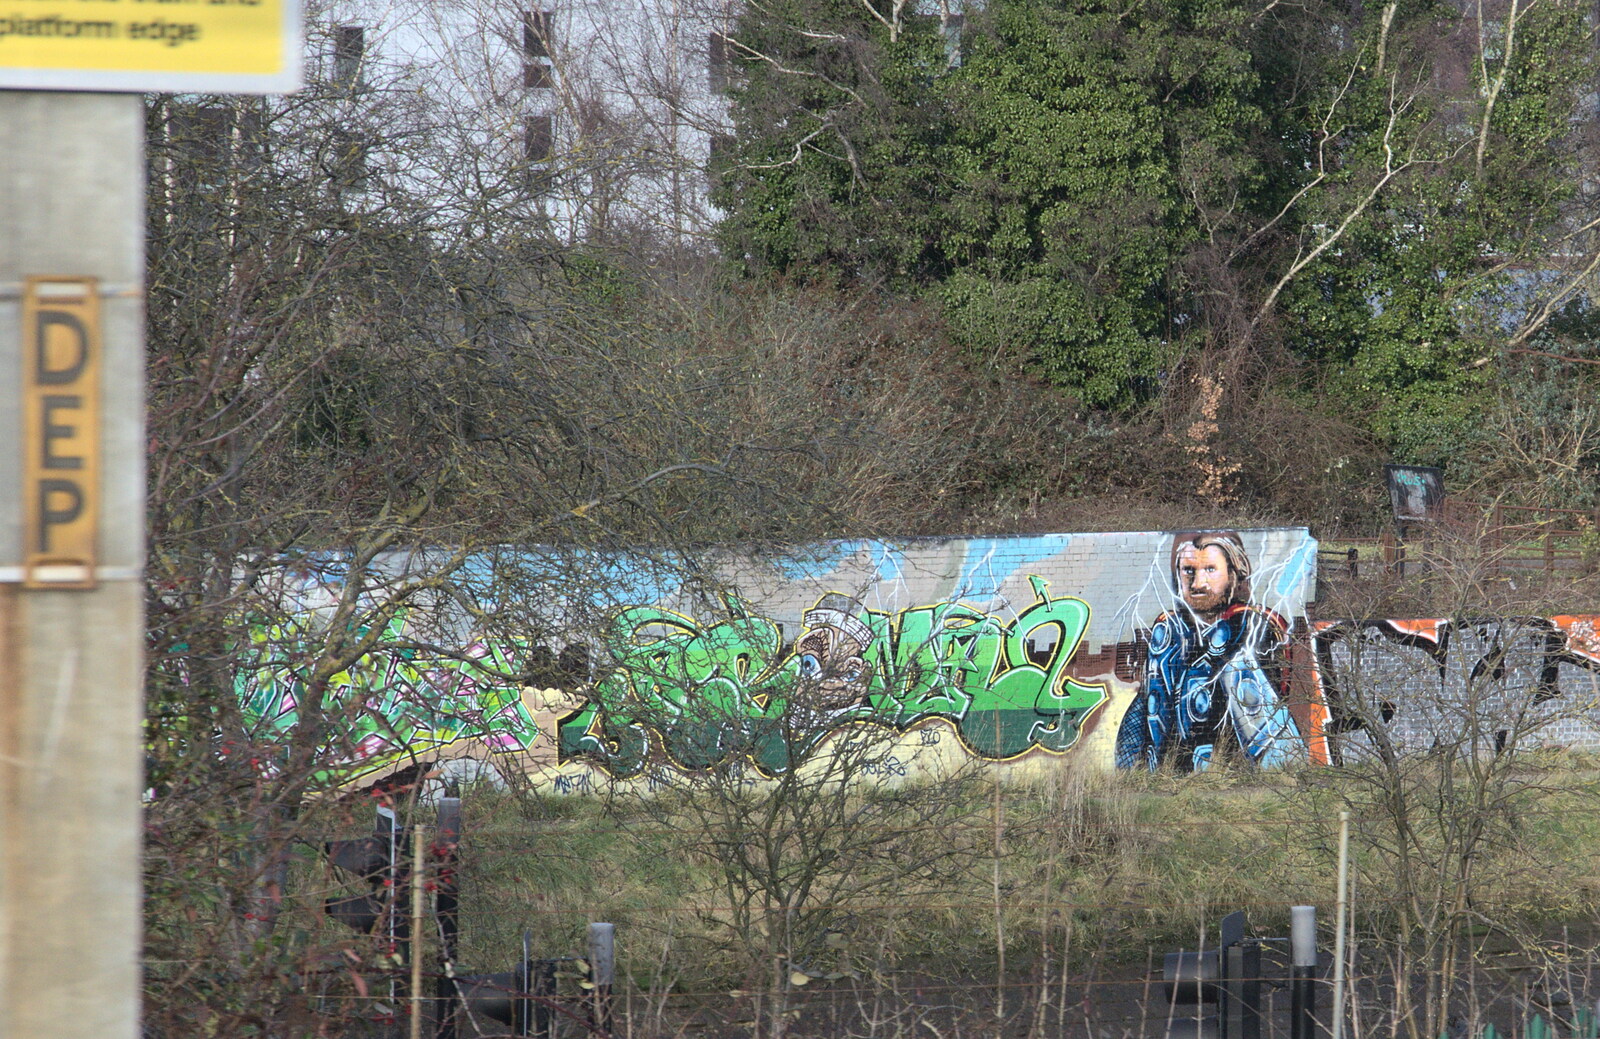 There's some street-art by the river in Ipswich from A Wintry Trip Down South, Walkford, Dorset - 1st February 2019